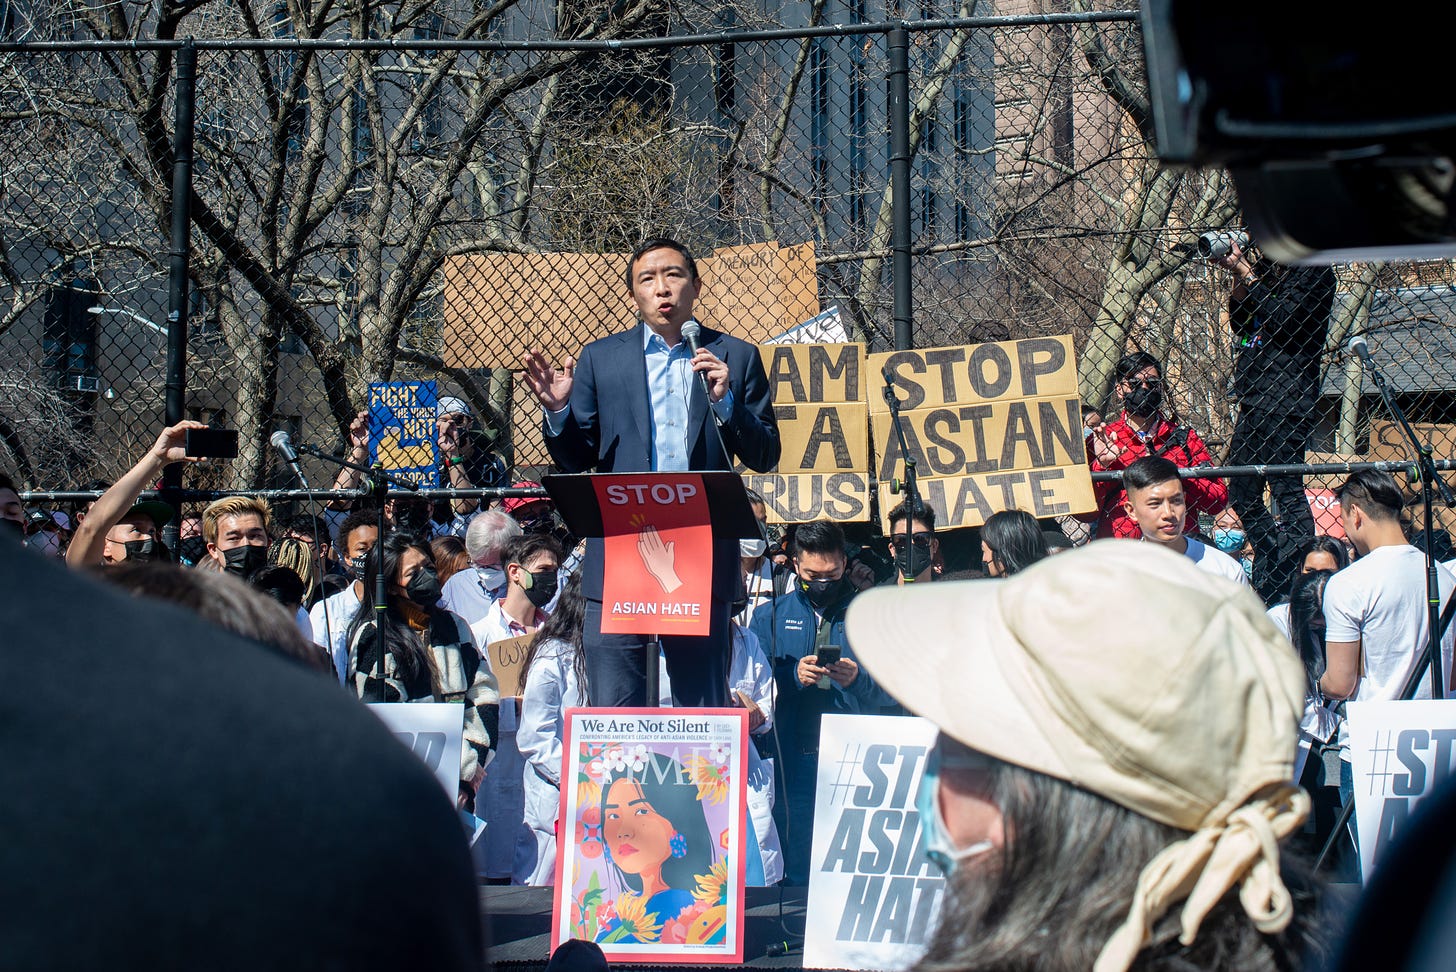 New York City Mayoral candidate Andrew Yang speaks at the "Rally Against Hate" in Chinatown on March 21, 2021 in New York City.